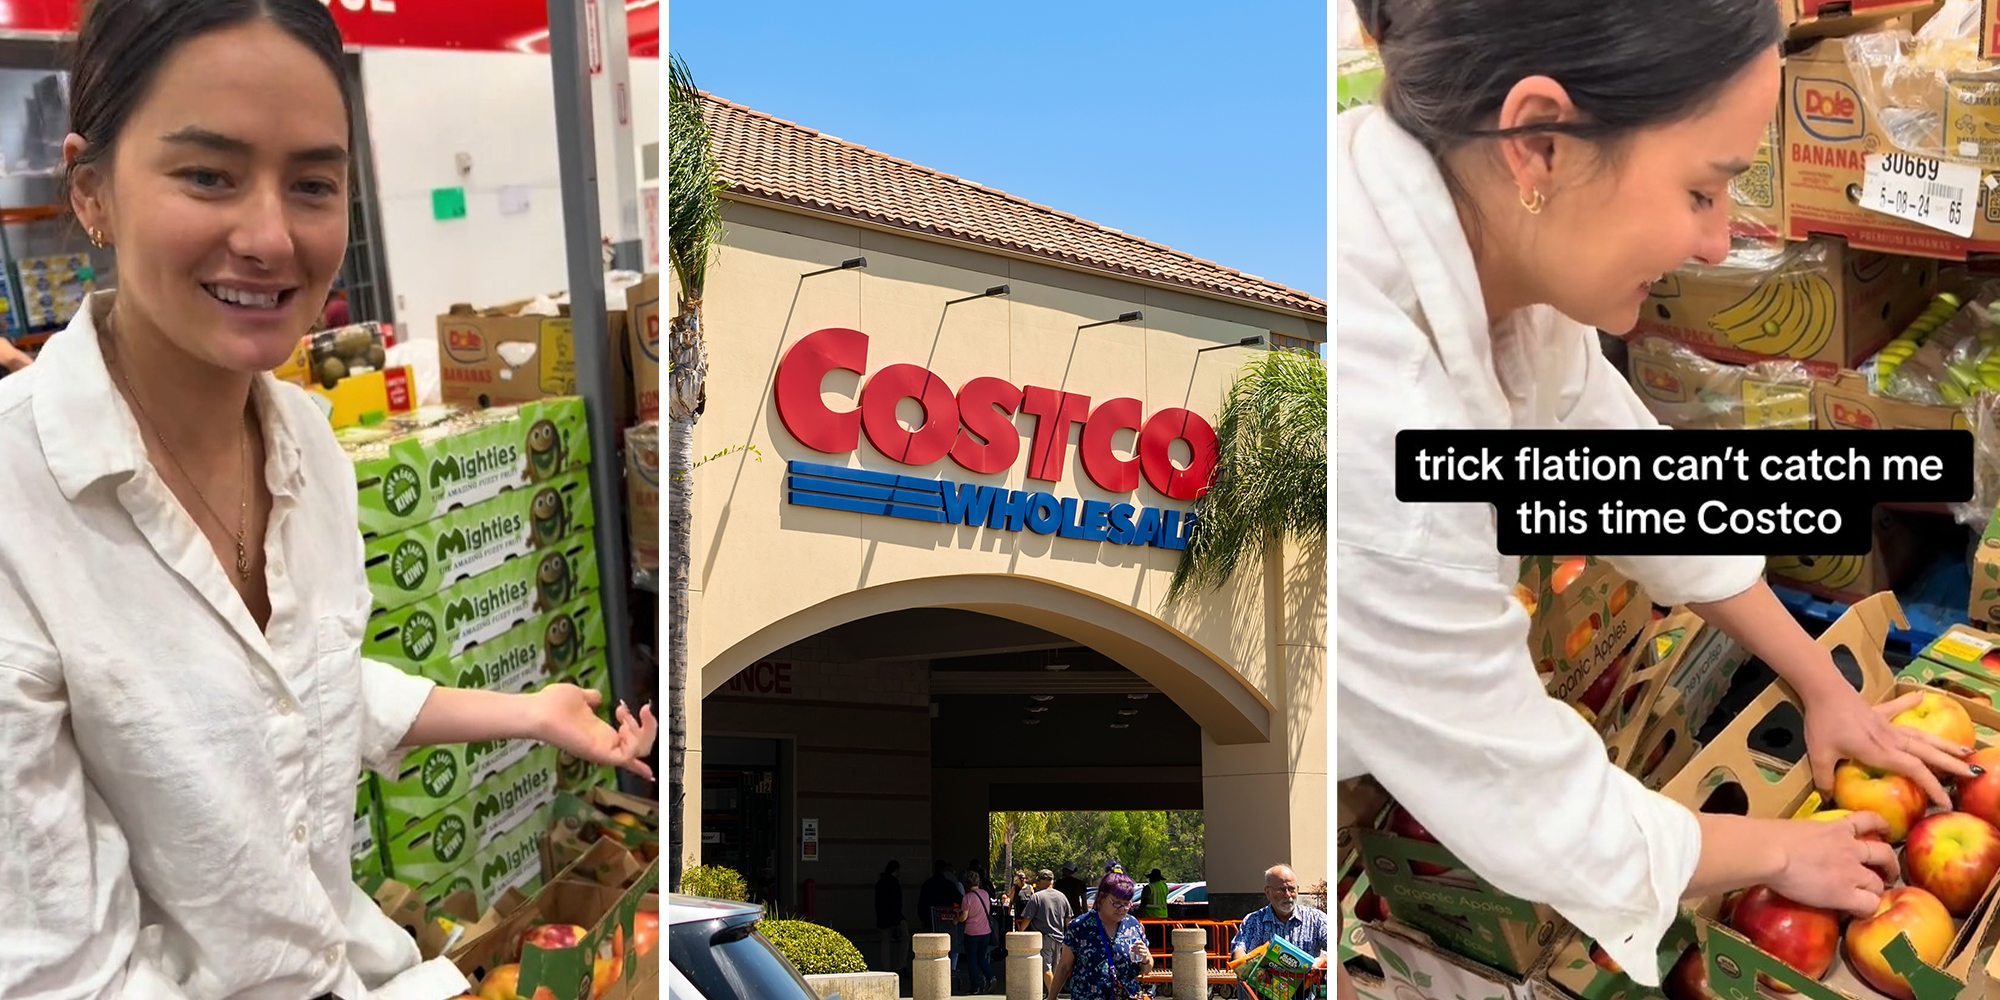 dailydot.com - Tiffanie Drayton - 'They think they're slick': Viewers divided after woman shares her hack to avoiding 'trickflation' at Costco